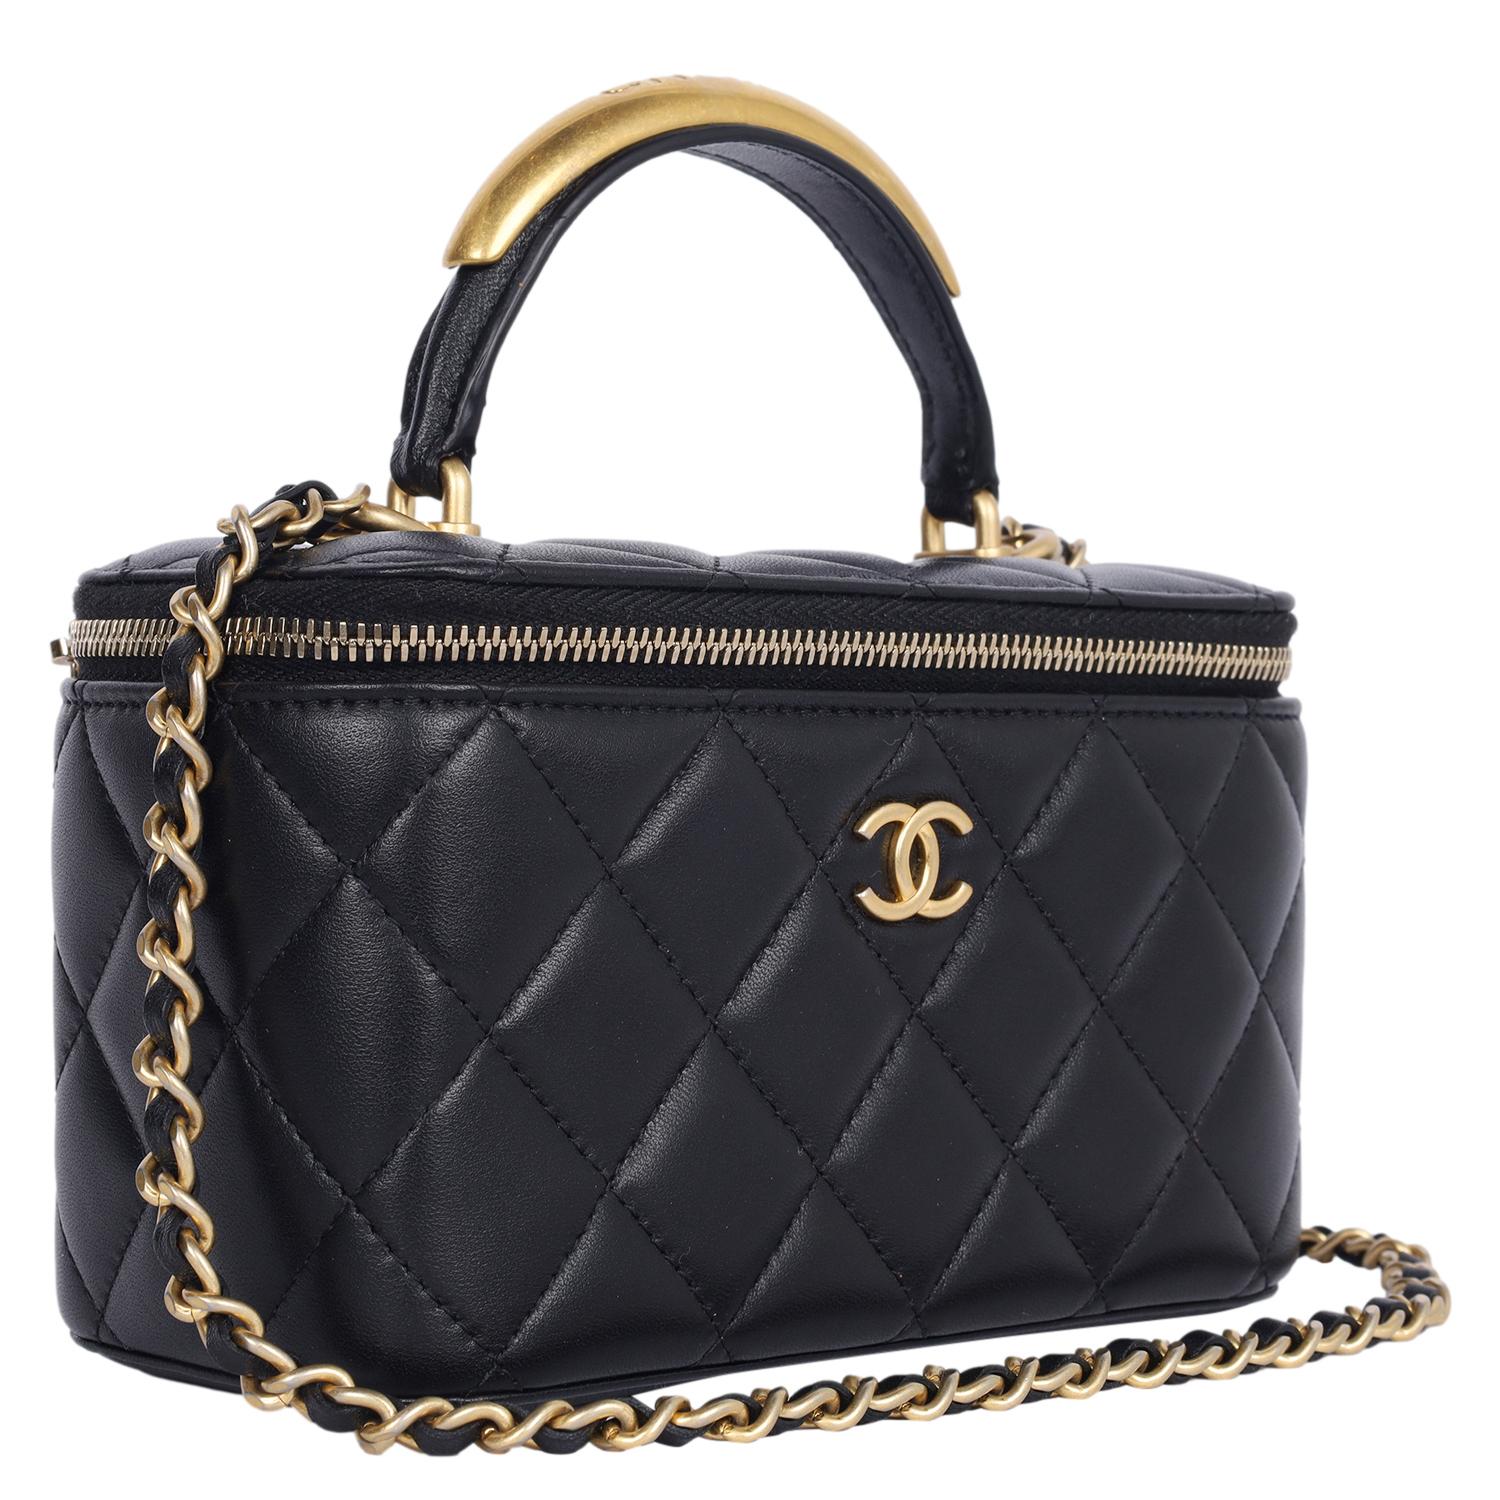 Chanel Lambskin Quilted Small Top Handle Vanity Case Black Crossbody Bag 2